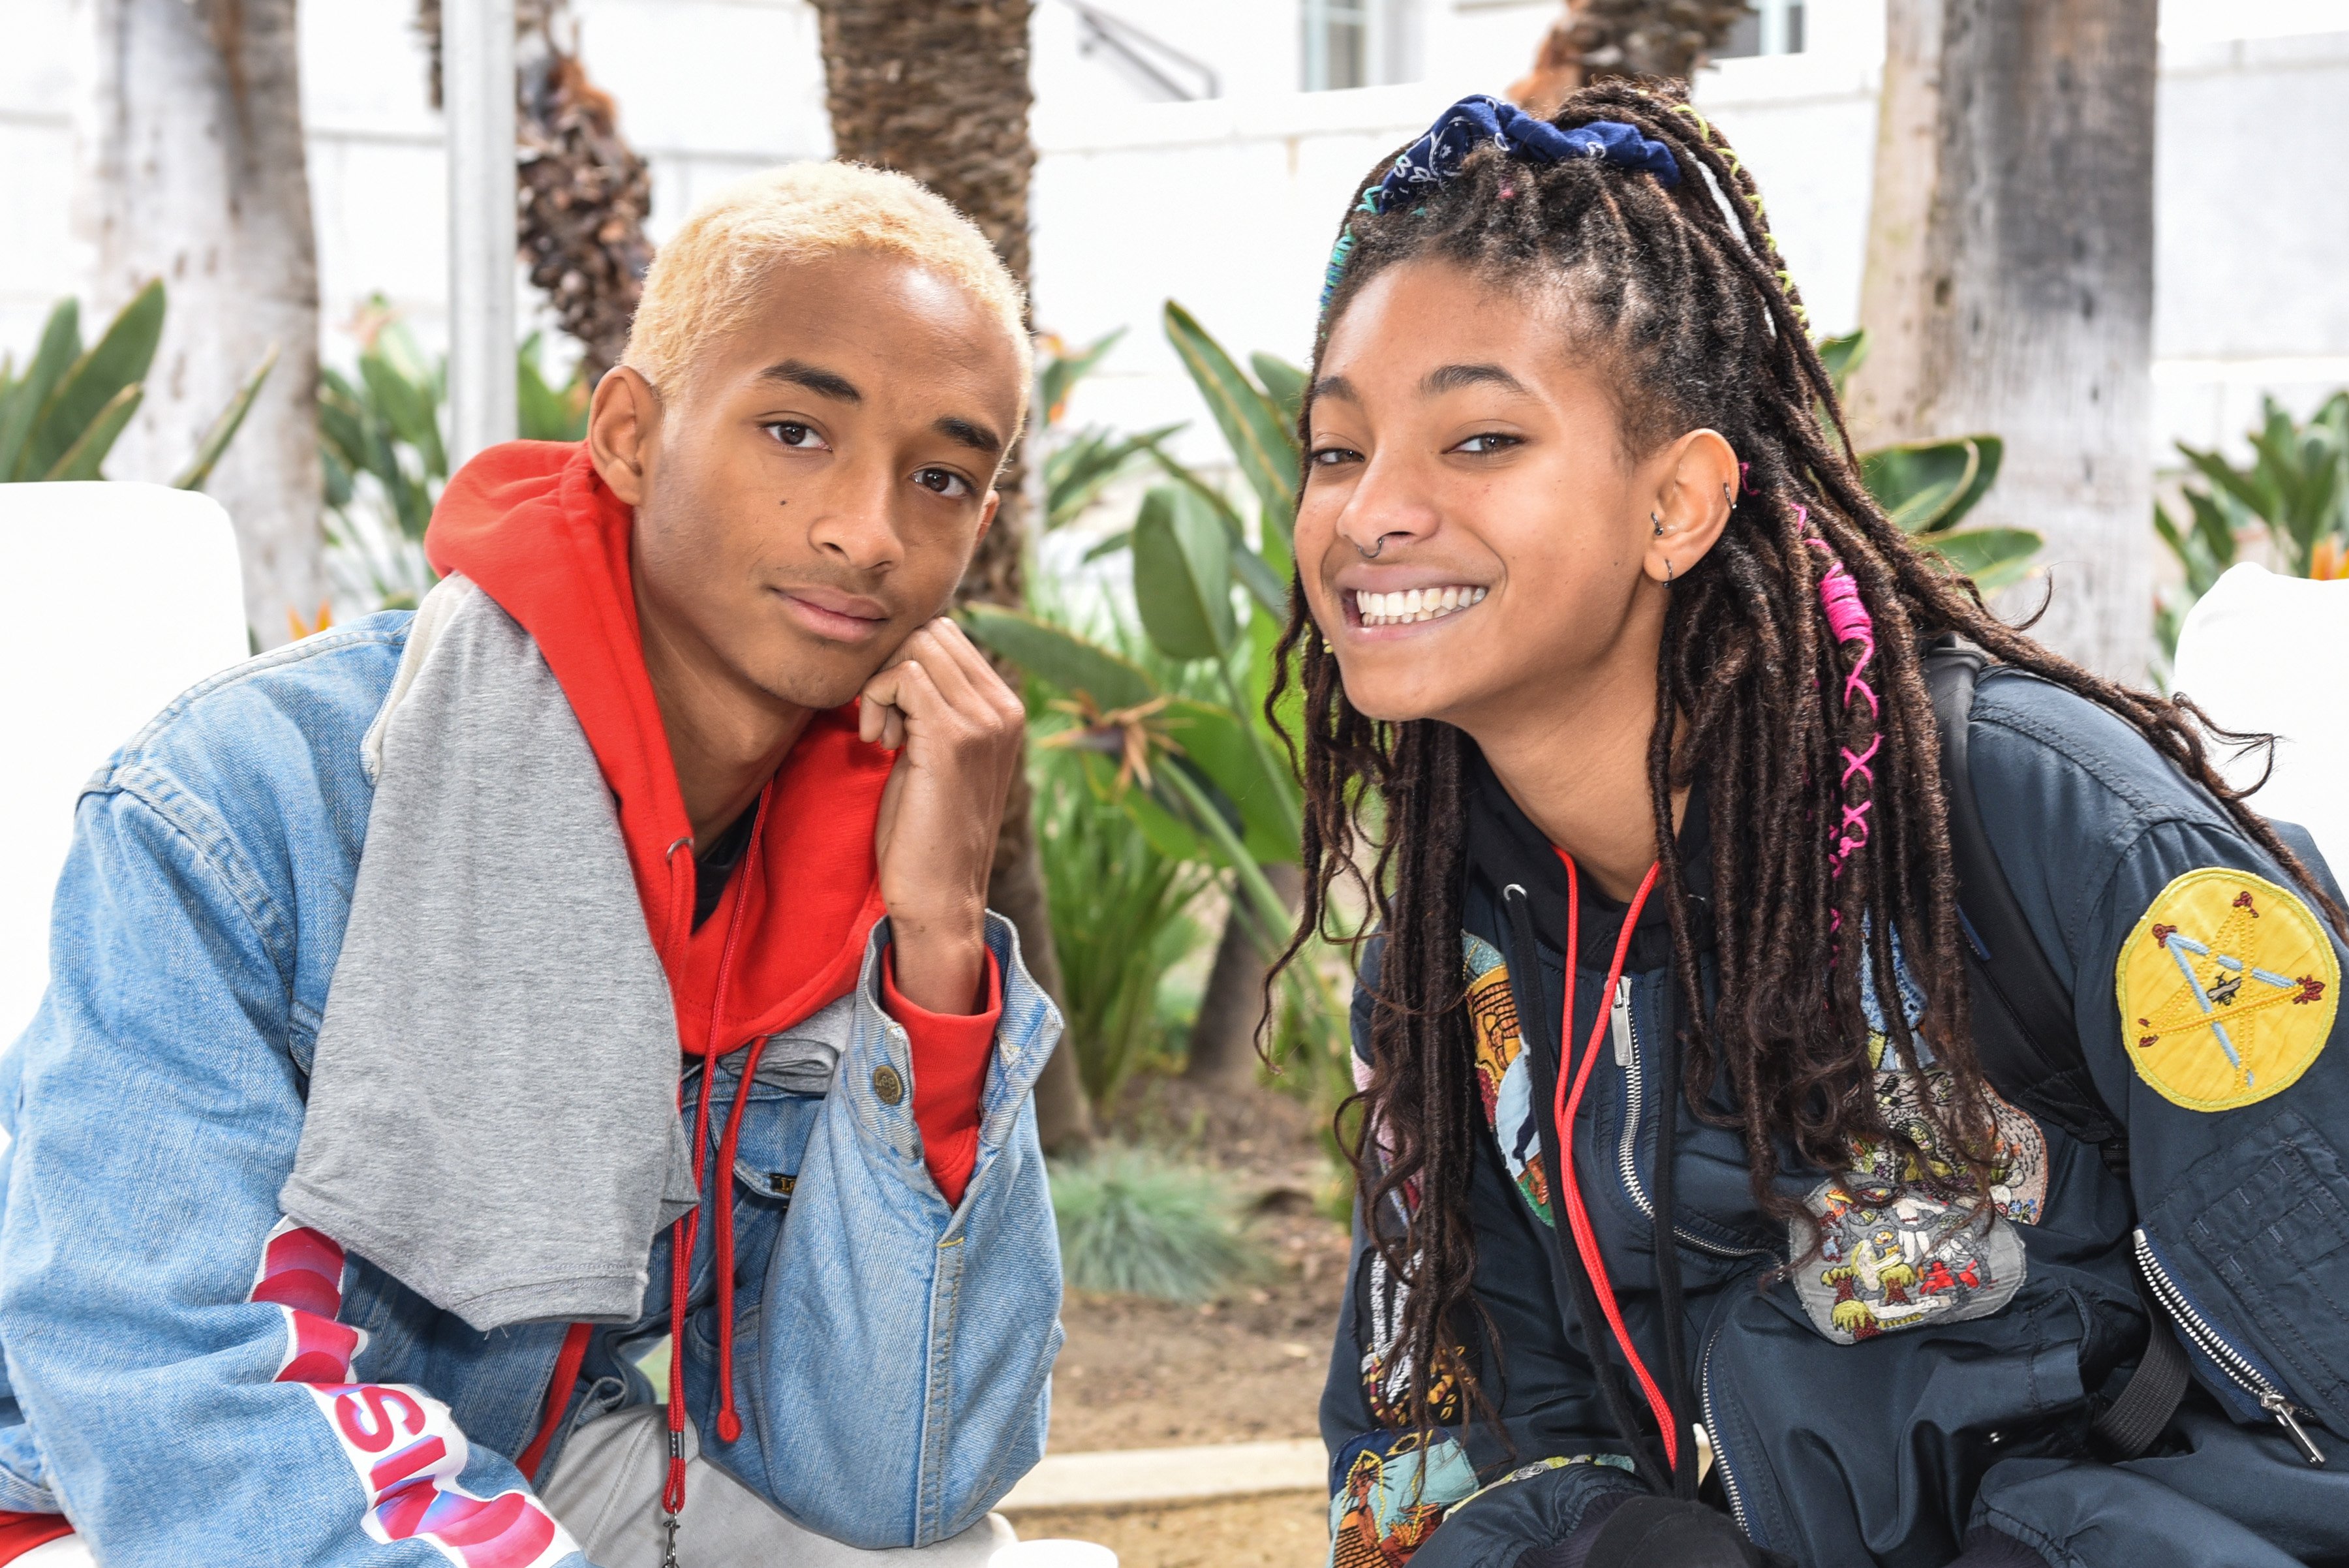 Jaden Smith and Willow Smith at the March For Our Lives in Los Angeles